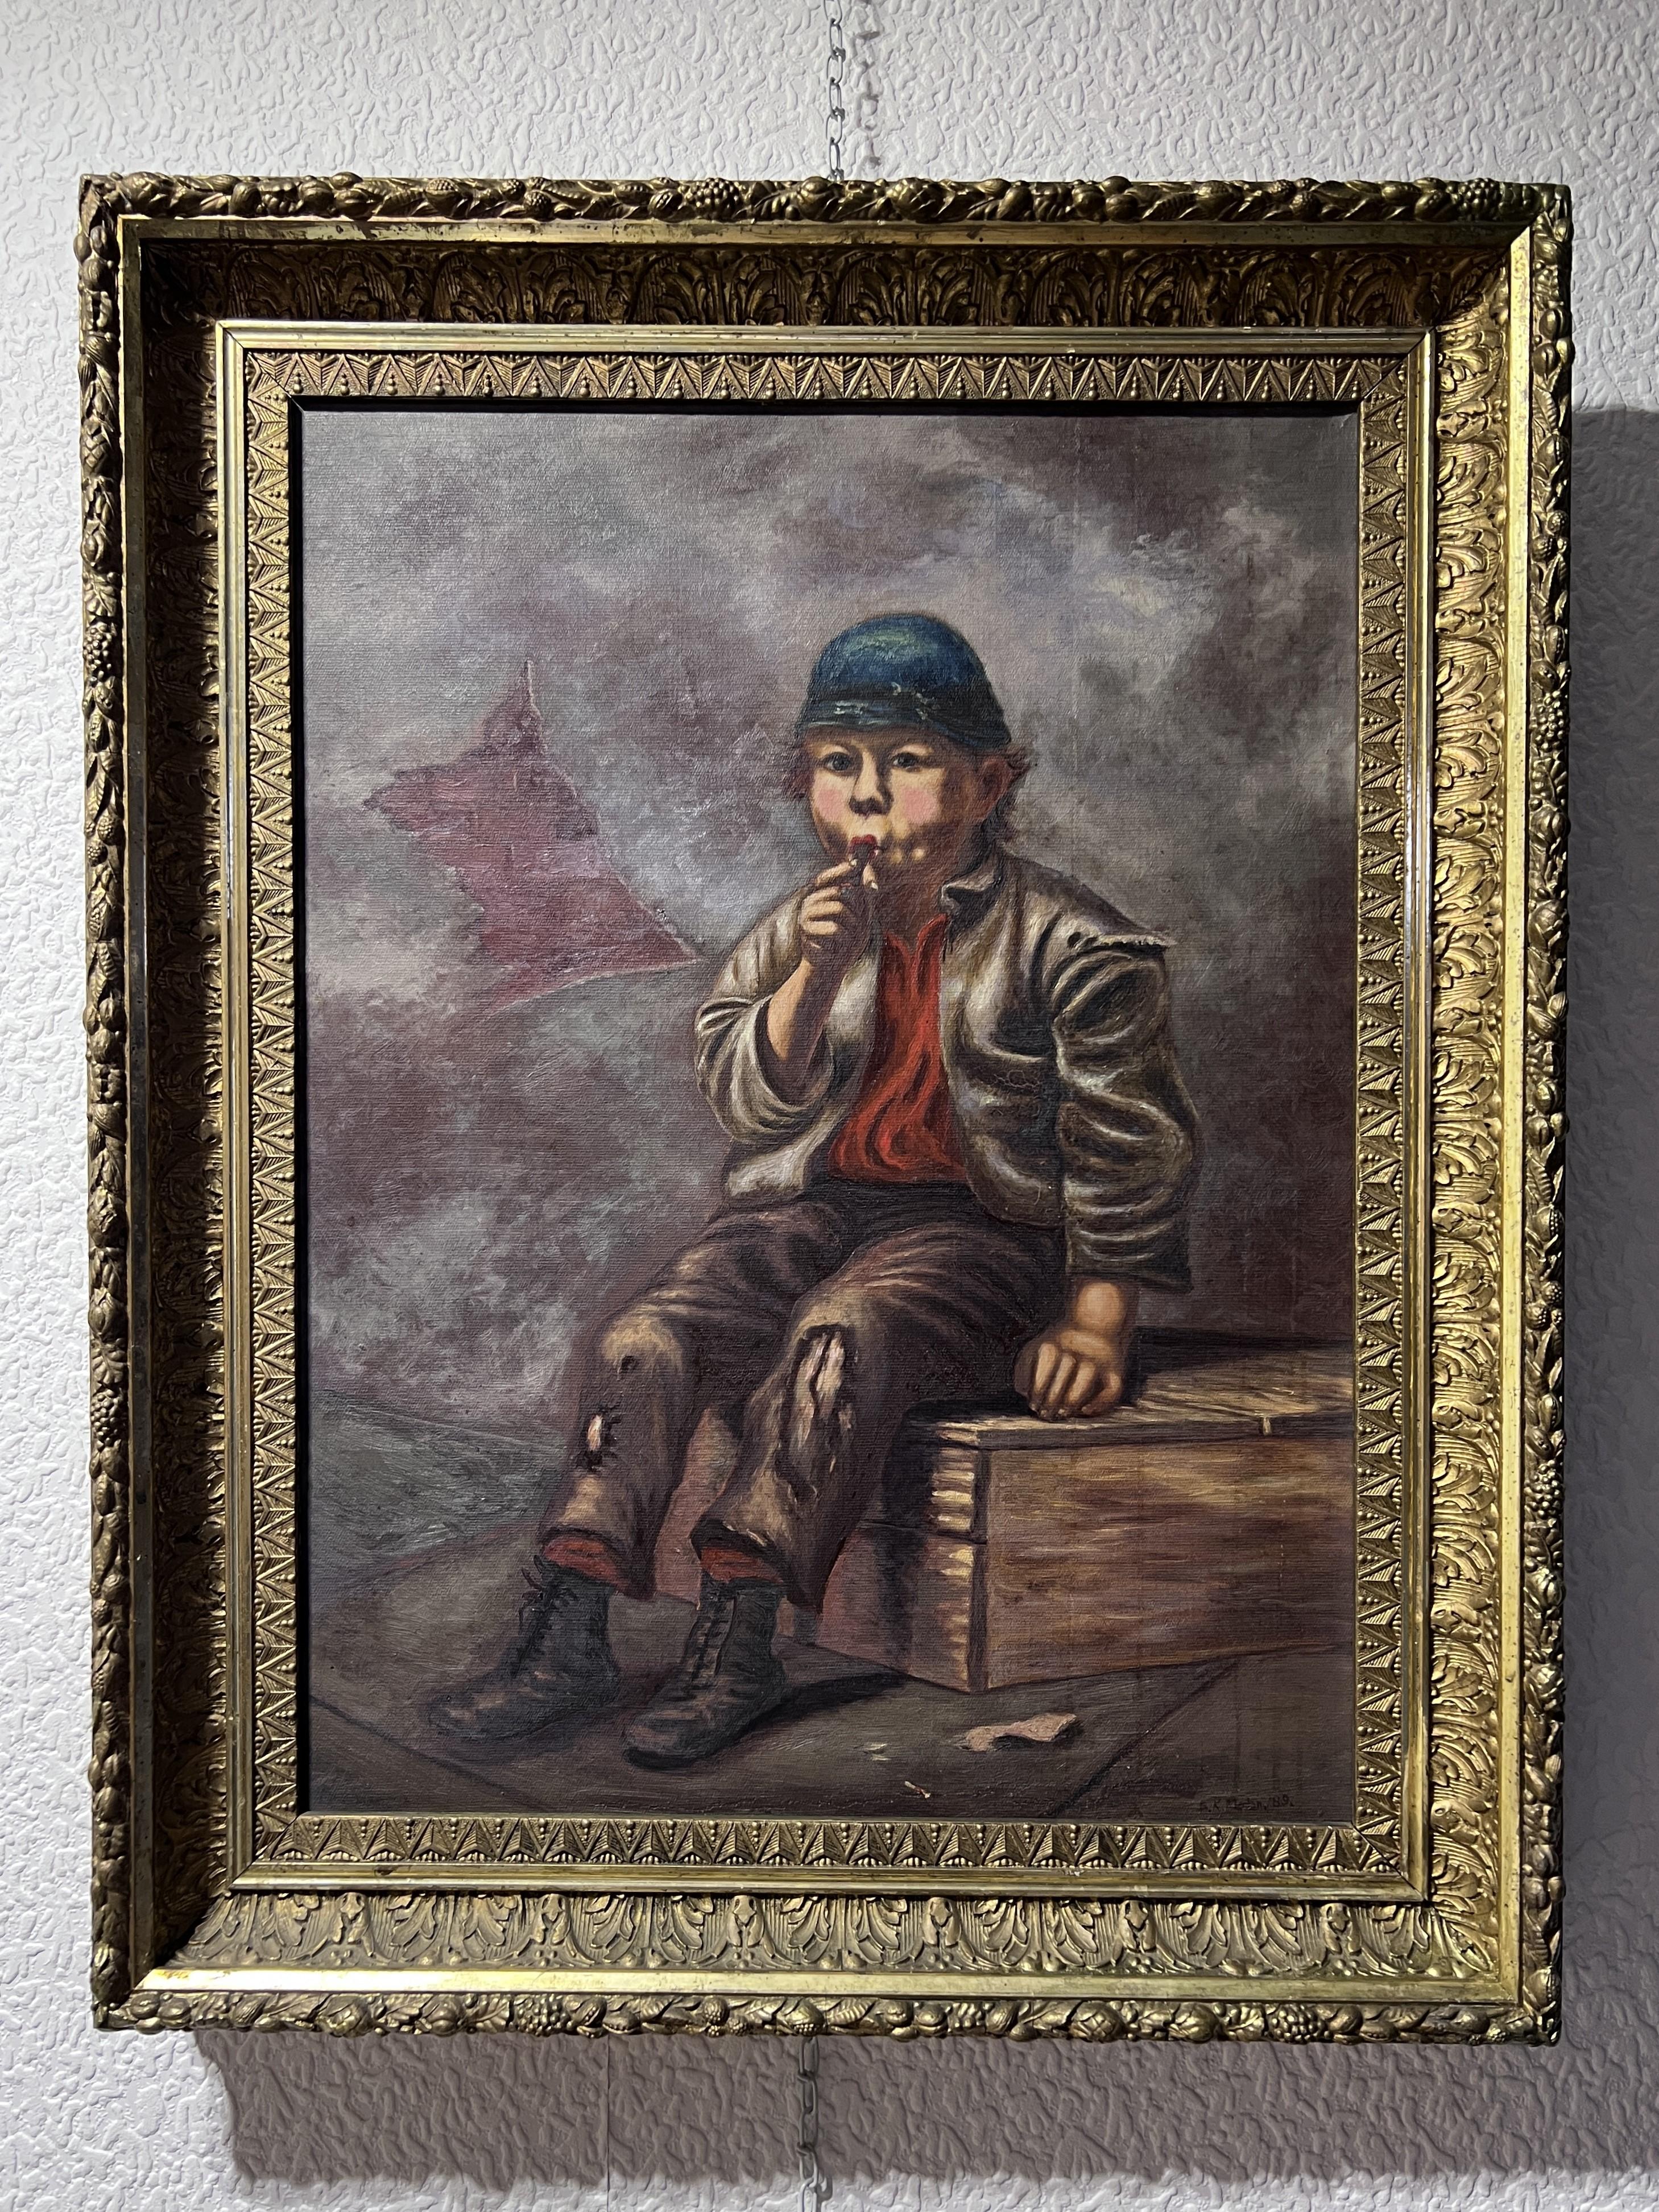 Up for sale is an original vintage oil painting on canvas.  This old painting shows a boy sitting down. He's dressed in a big jacket and pants with patches on them, and they look a bit worn out. His clothes are mostly dark except for a bright orange